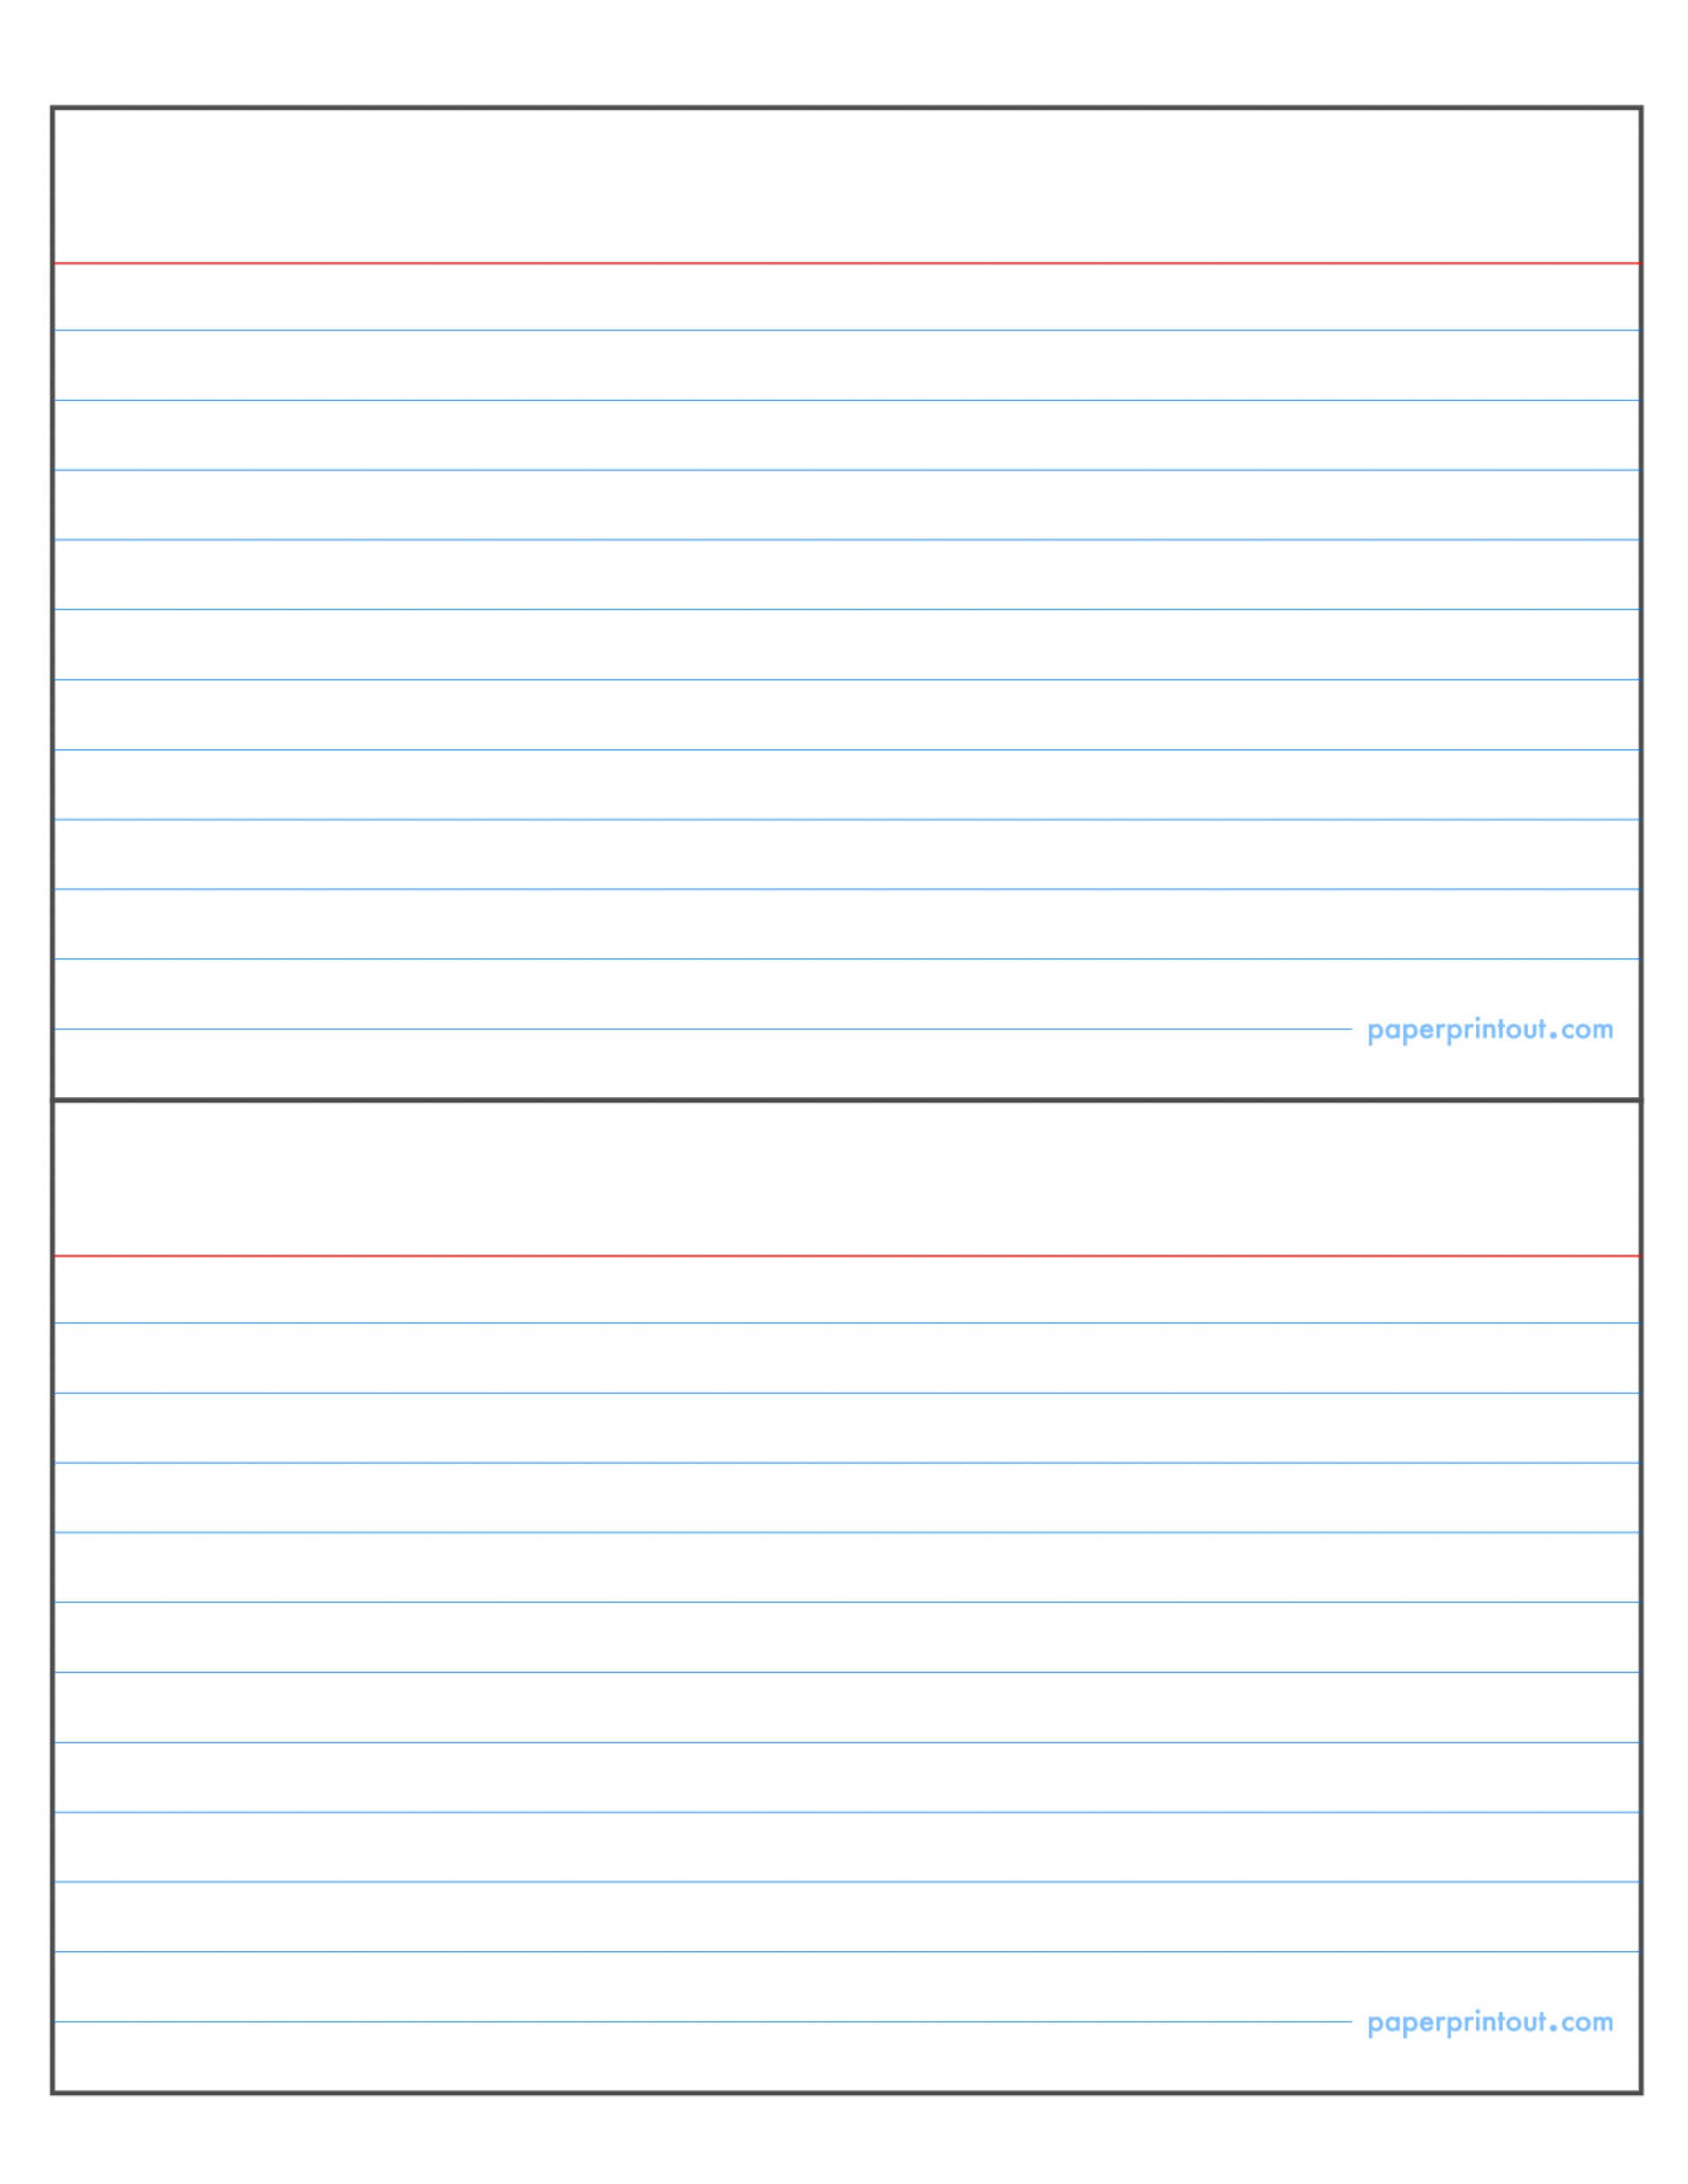 002 Index Card Template Word Ideas Fearsome Lined 3X5 Inside Index Card Template For Word